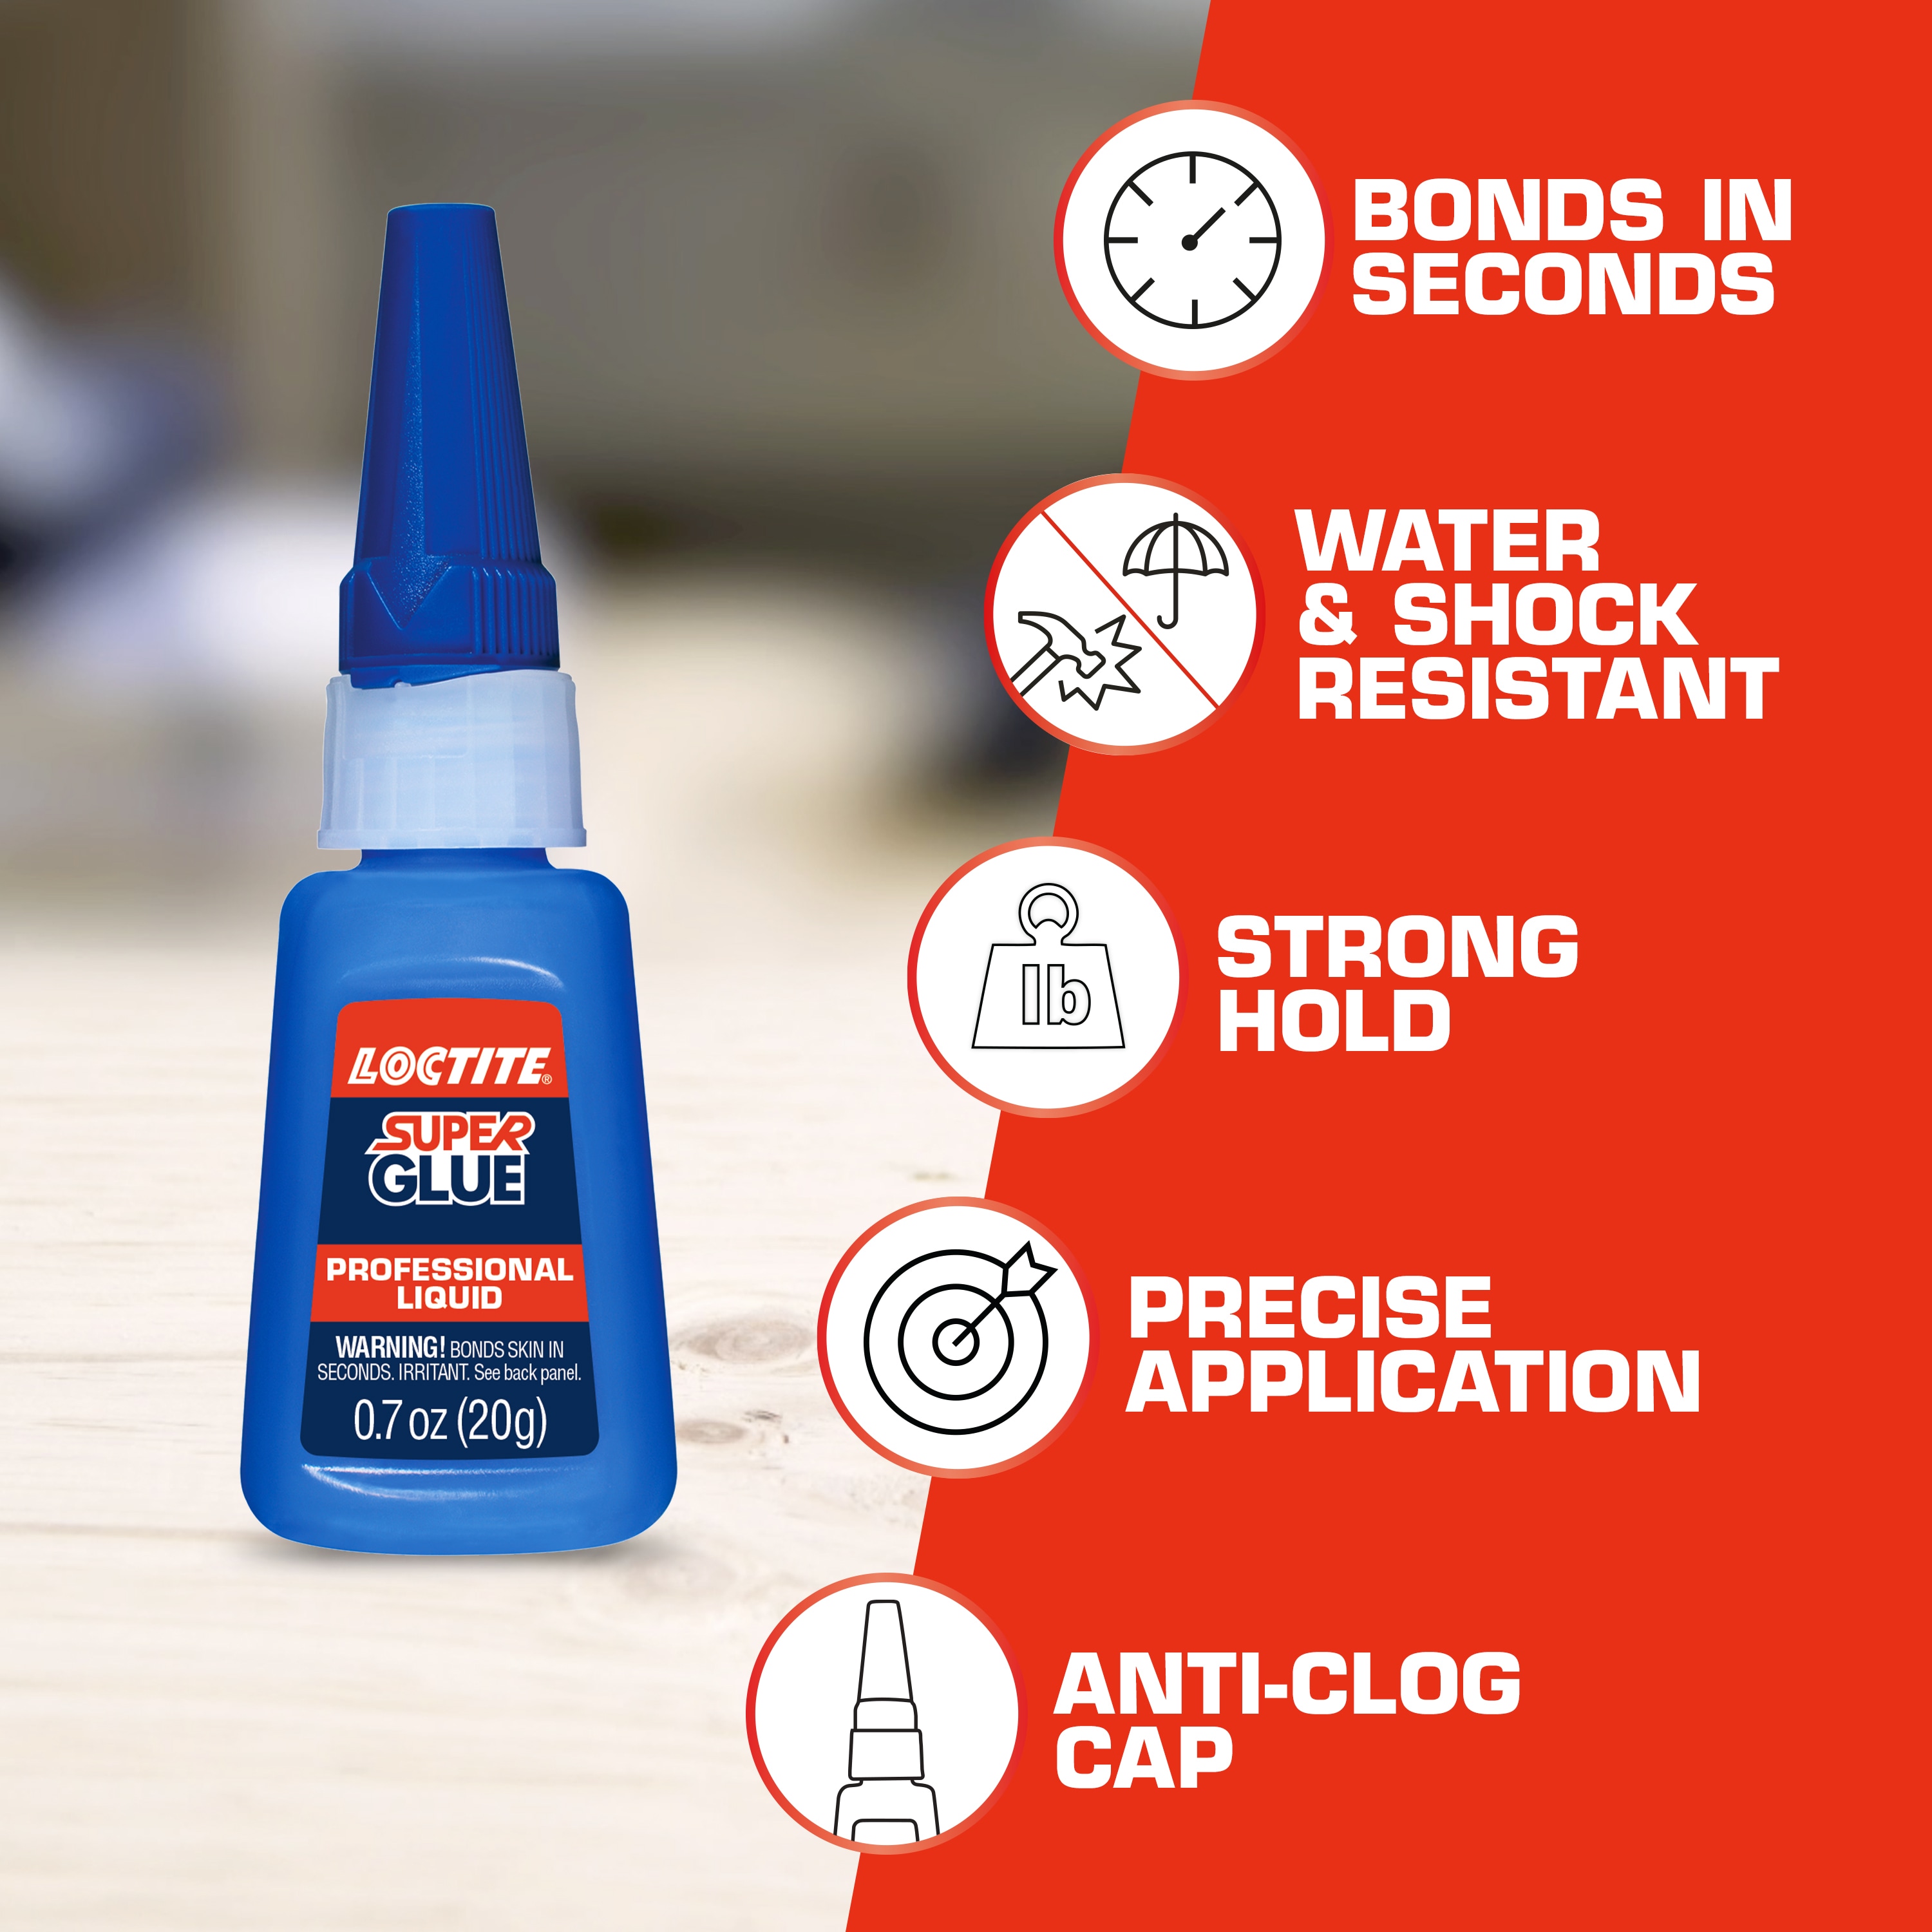 LOCTITE Glass Glue 2-Gram Multi-use Specialty Adhesive in the Specialty  Adhesive department at